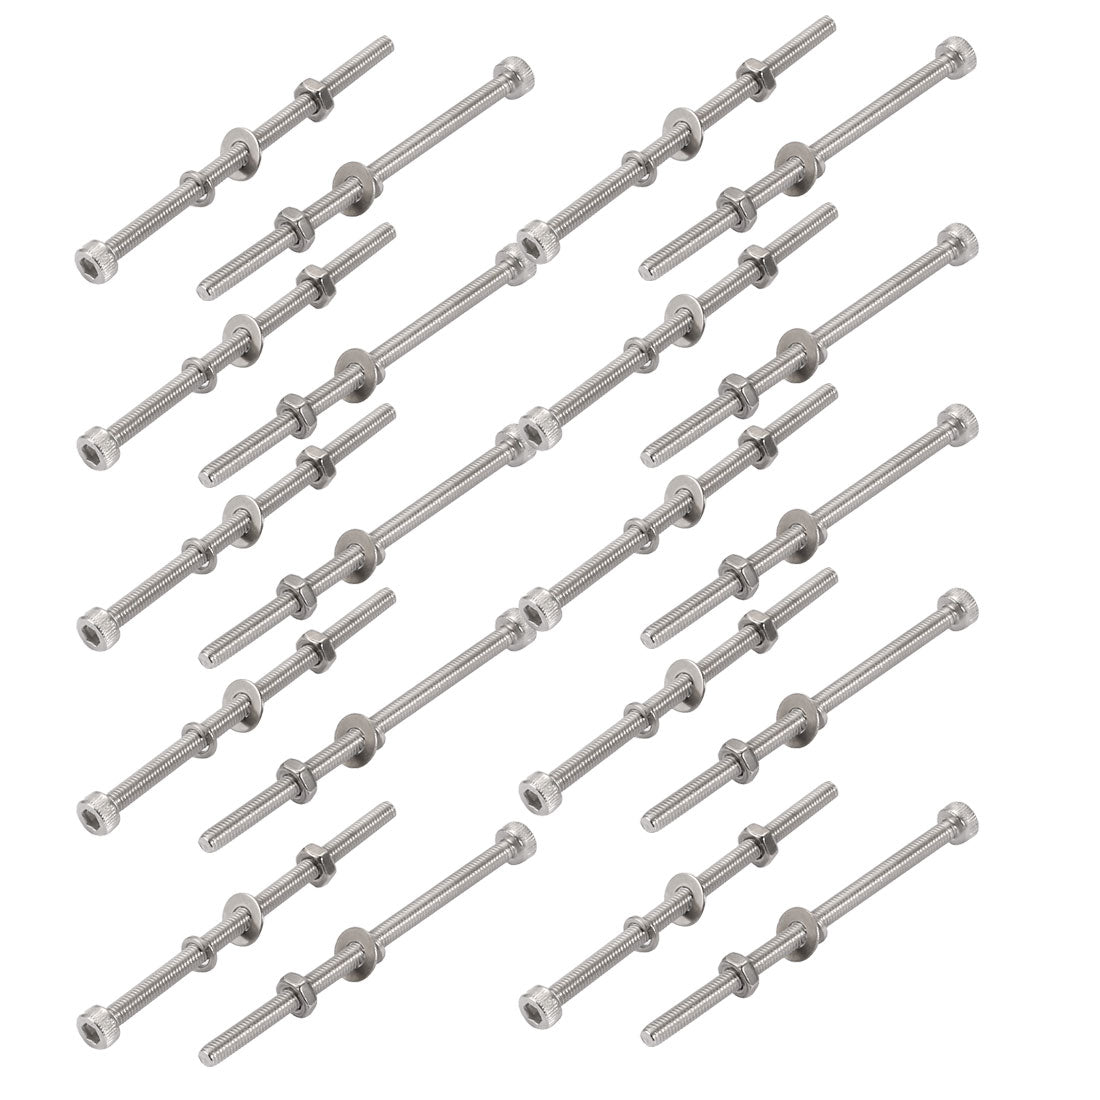 uxcell Uxcell 20Pcs M3x55mm 304 Stainless Steel Knurled Hex Socket Head Bolt Nut Set w Washer